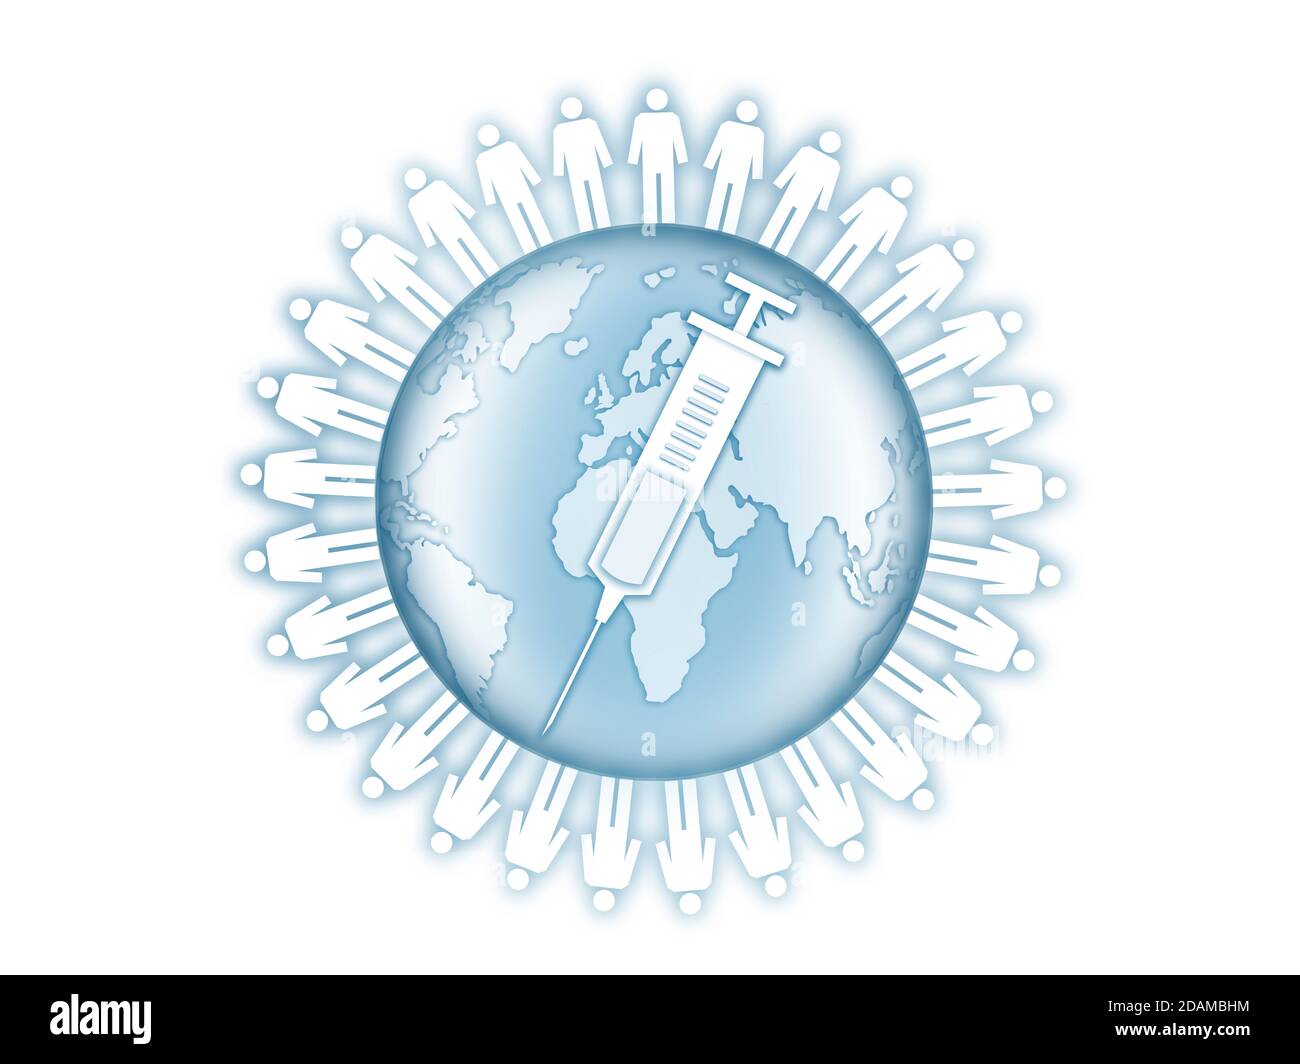 Earth surrounded by people with syringe, illustration. Stock Photo